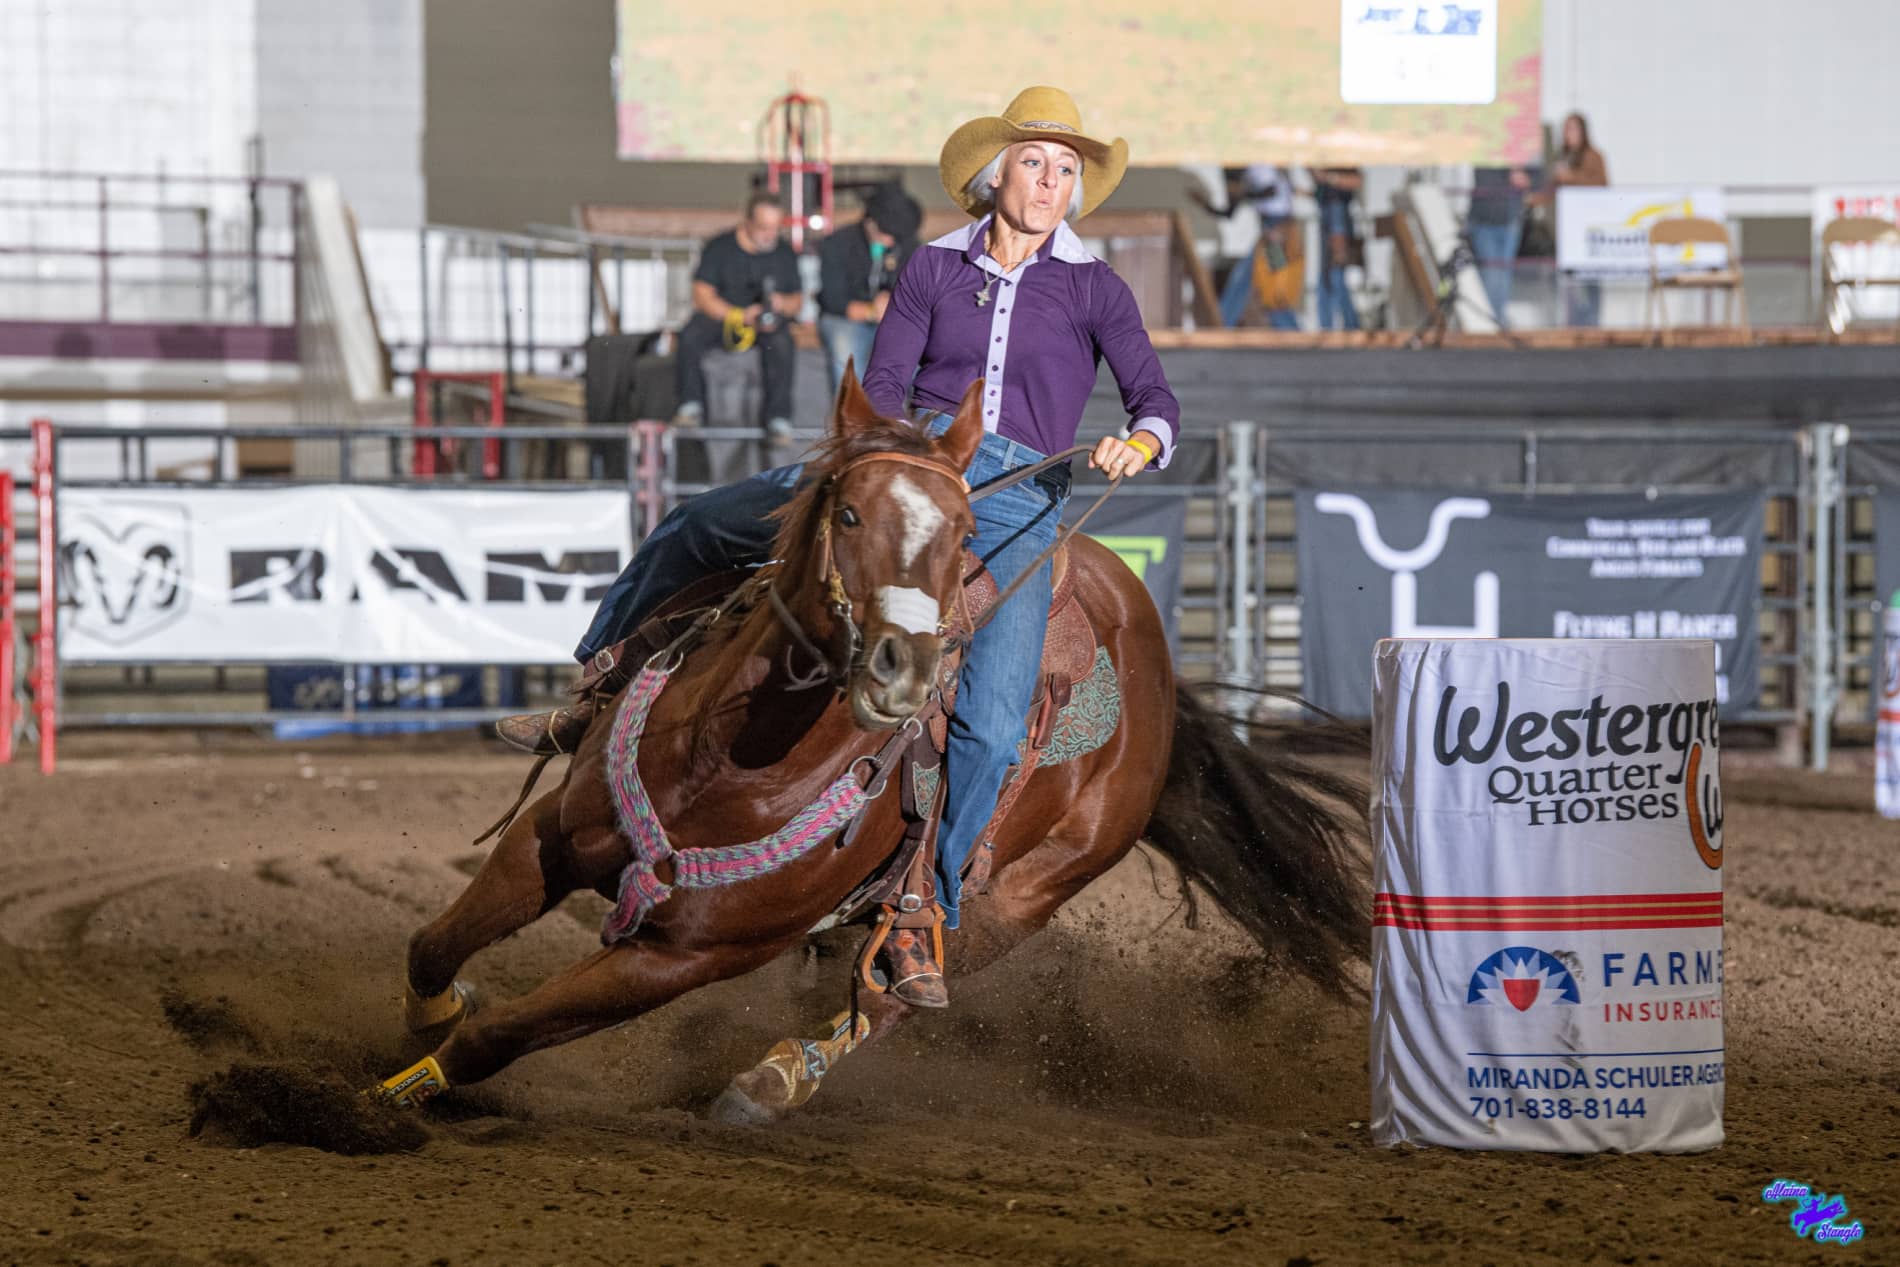 Horses for Courses, Badlands Circuit Awards Horses for Rodeo Ability